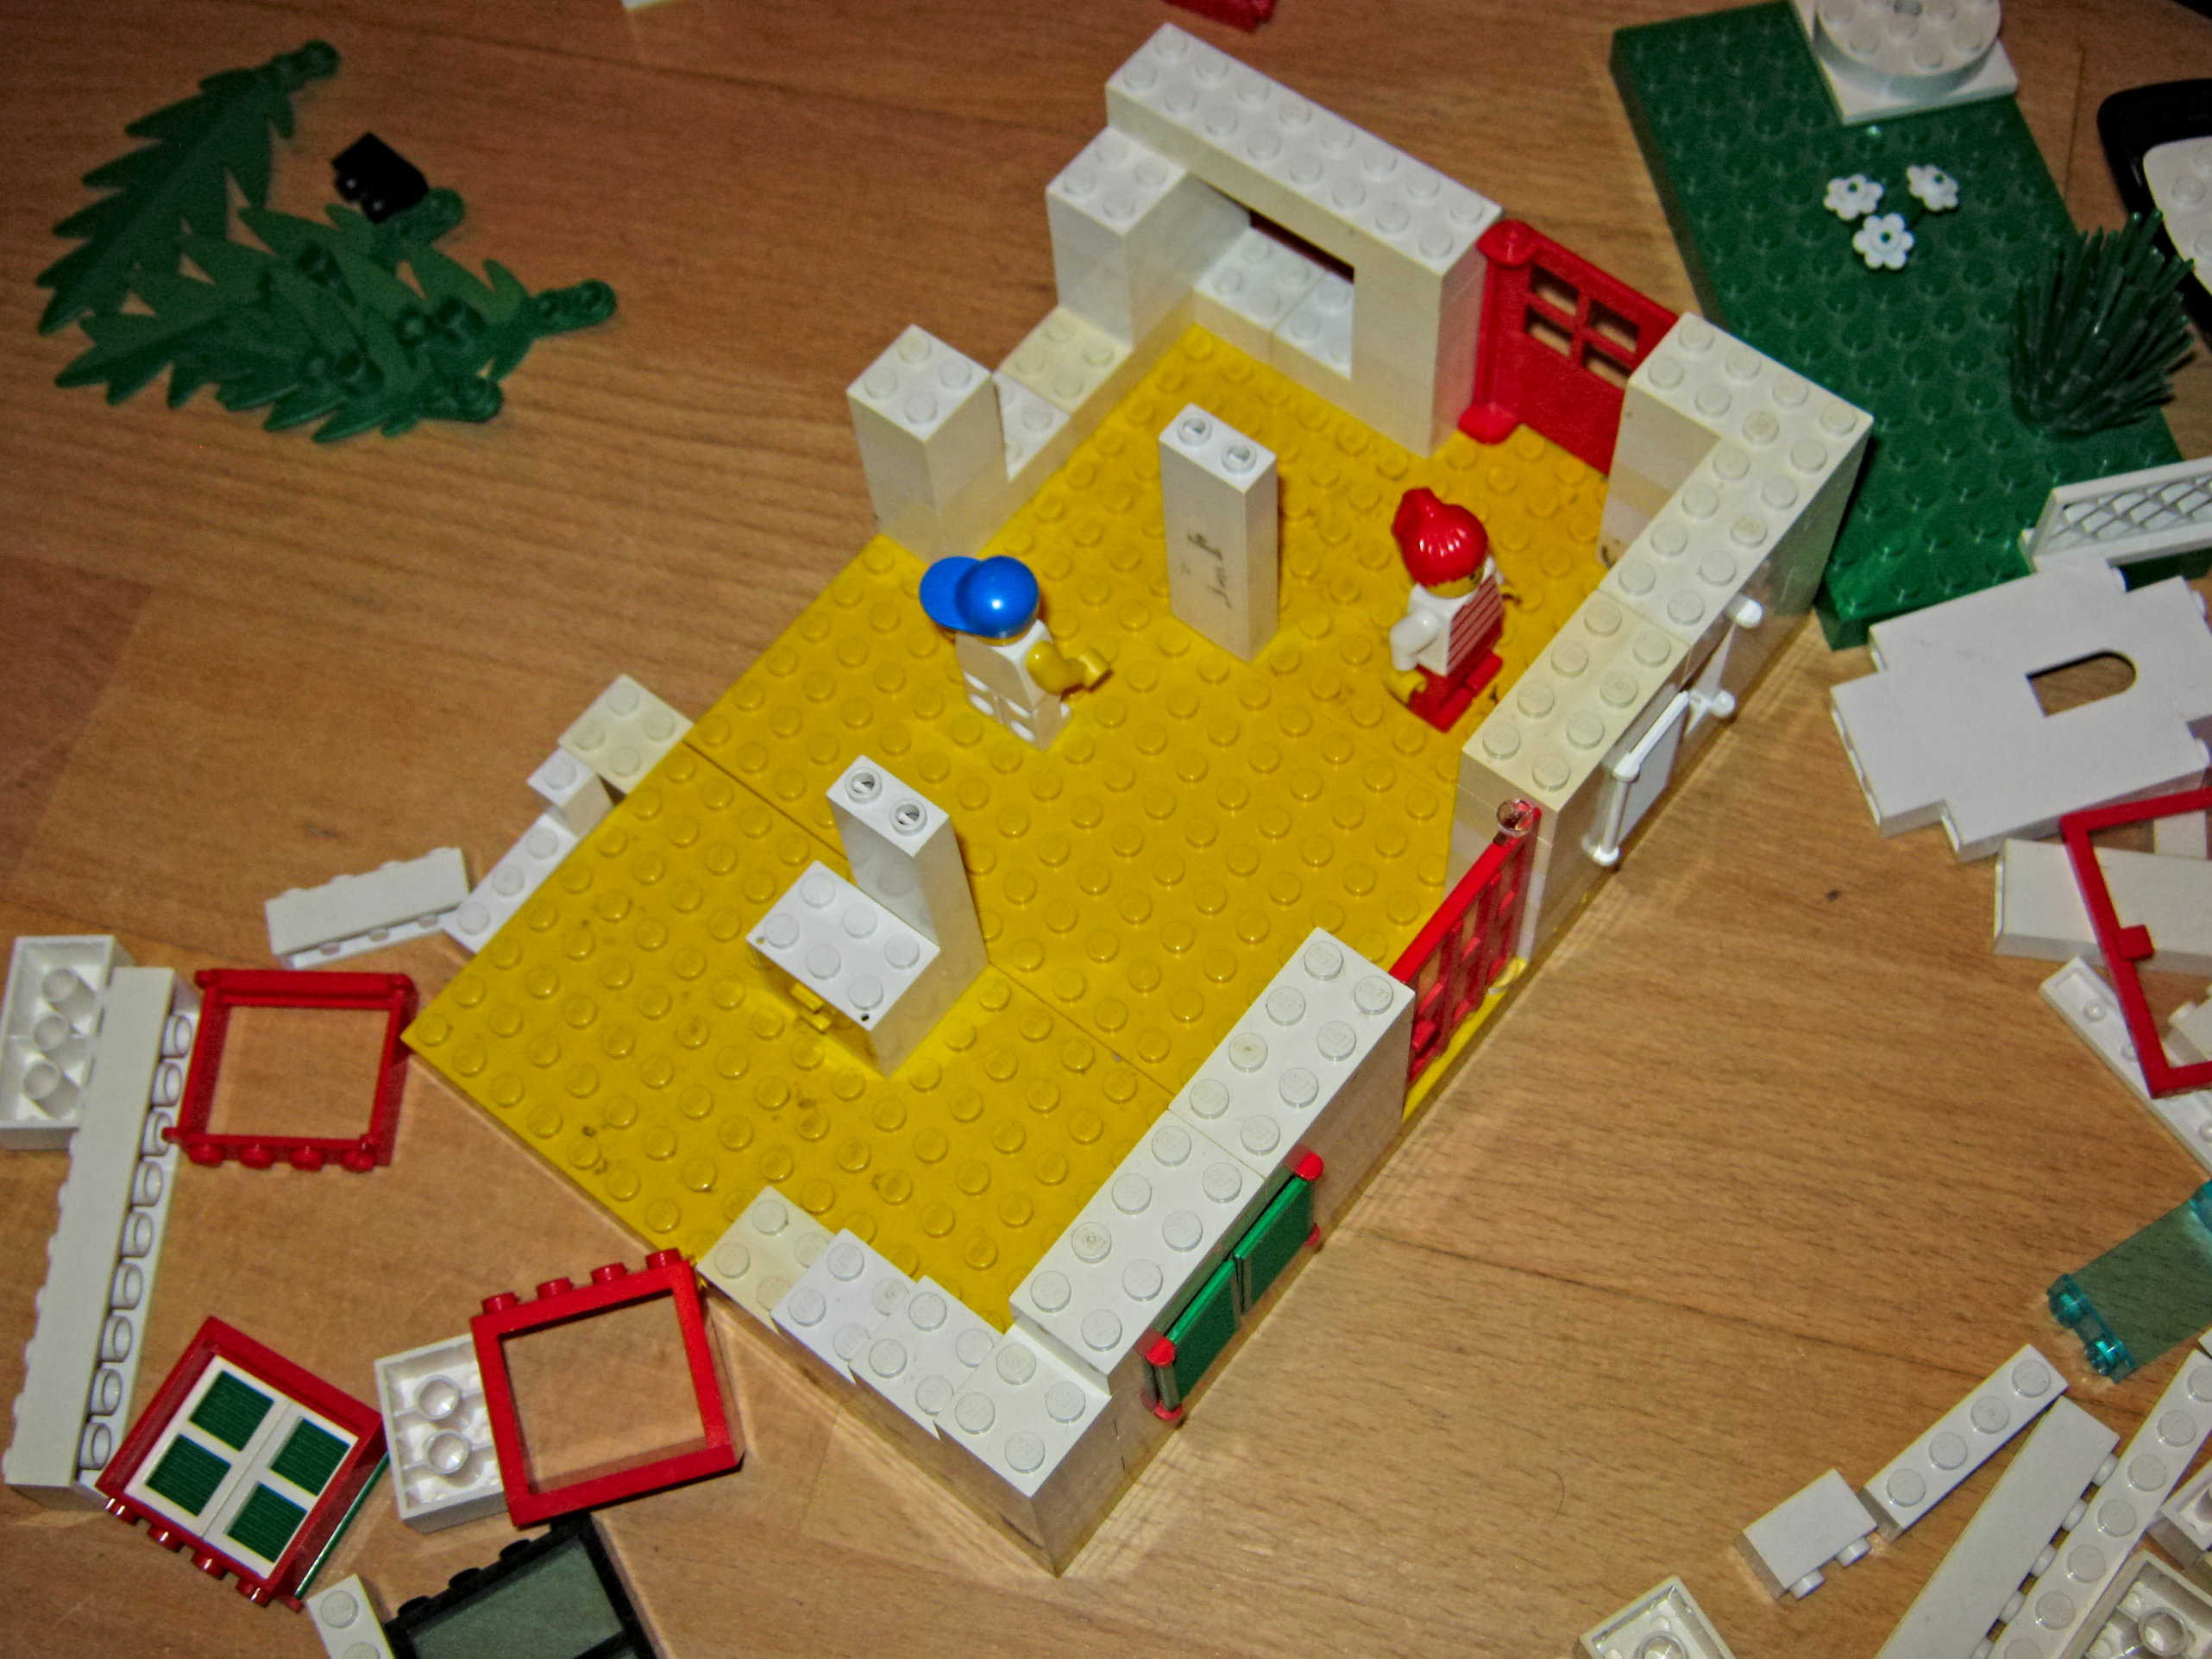 A house made of toy bricks in its early stages; there is just the baseplate and some provisional walls.